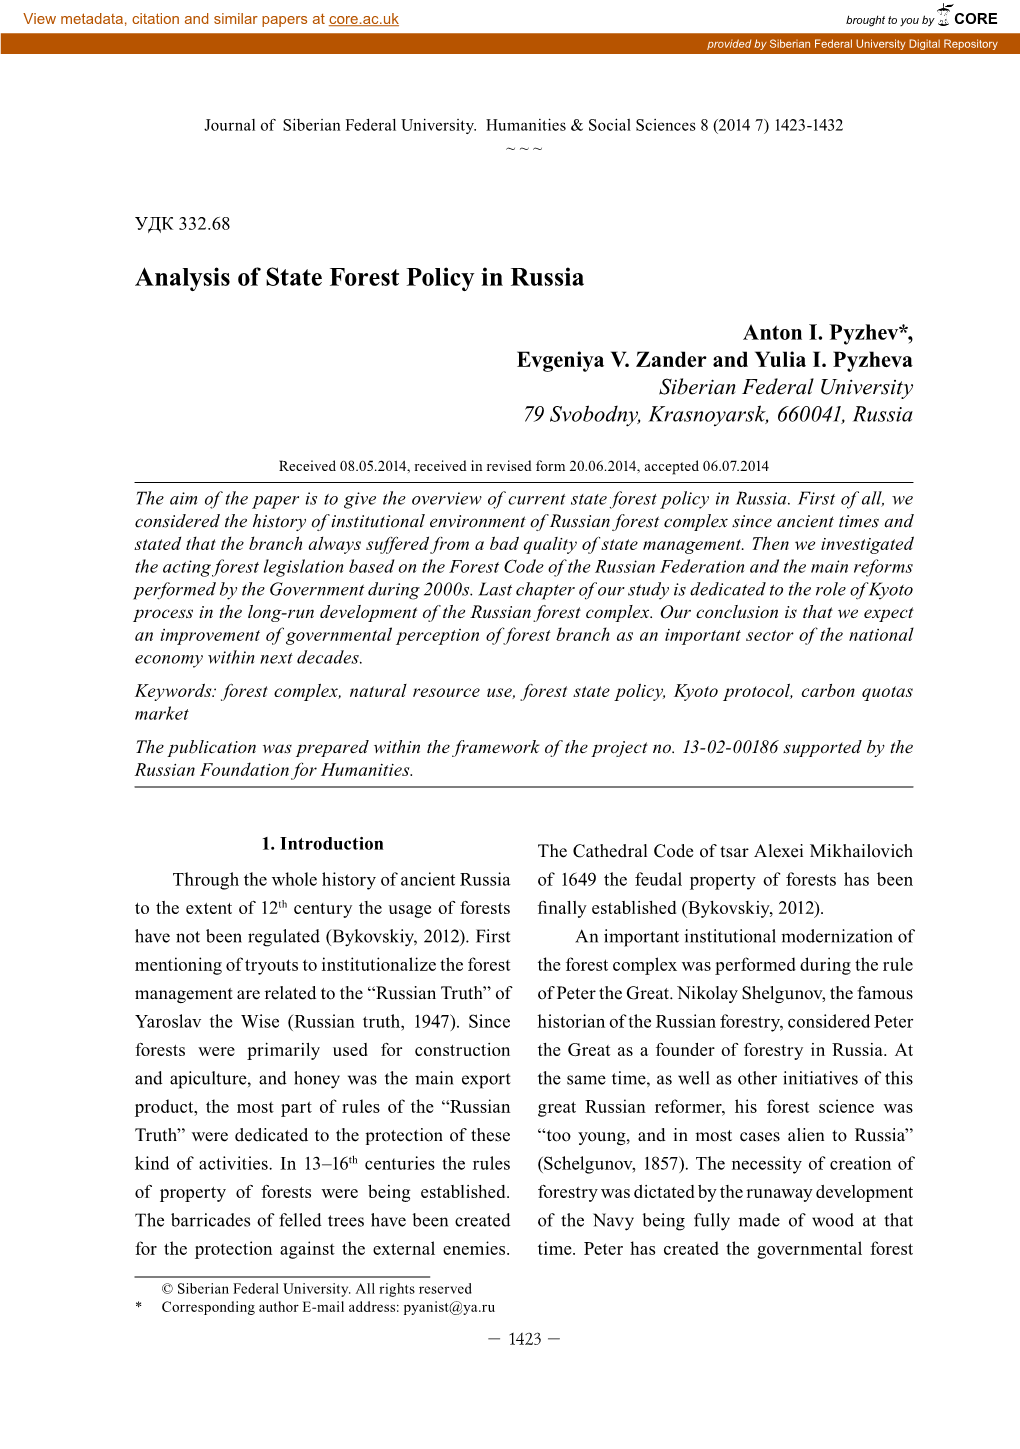 Analysis of State Forest Policy in Russia